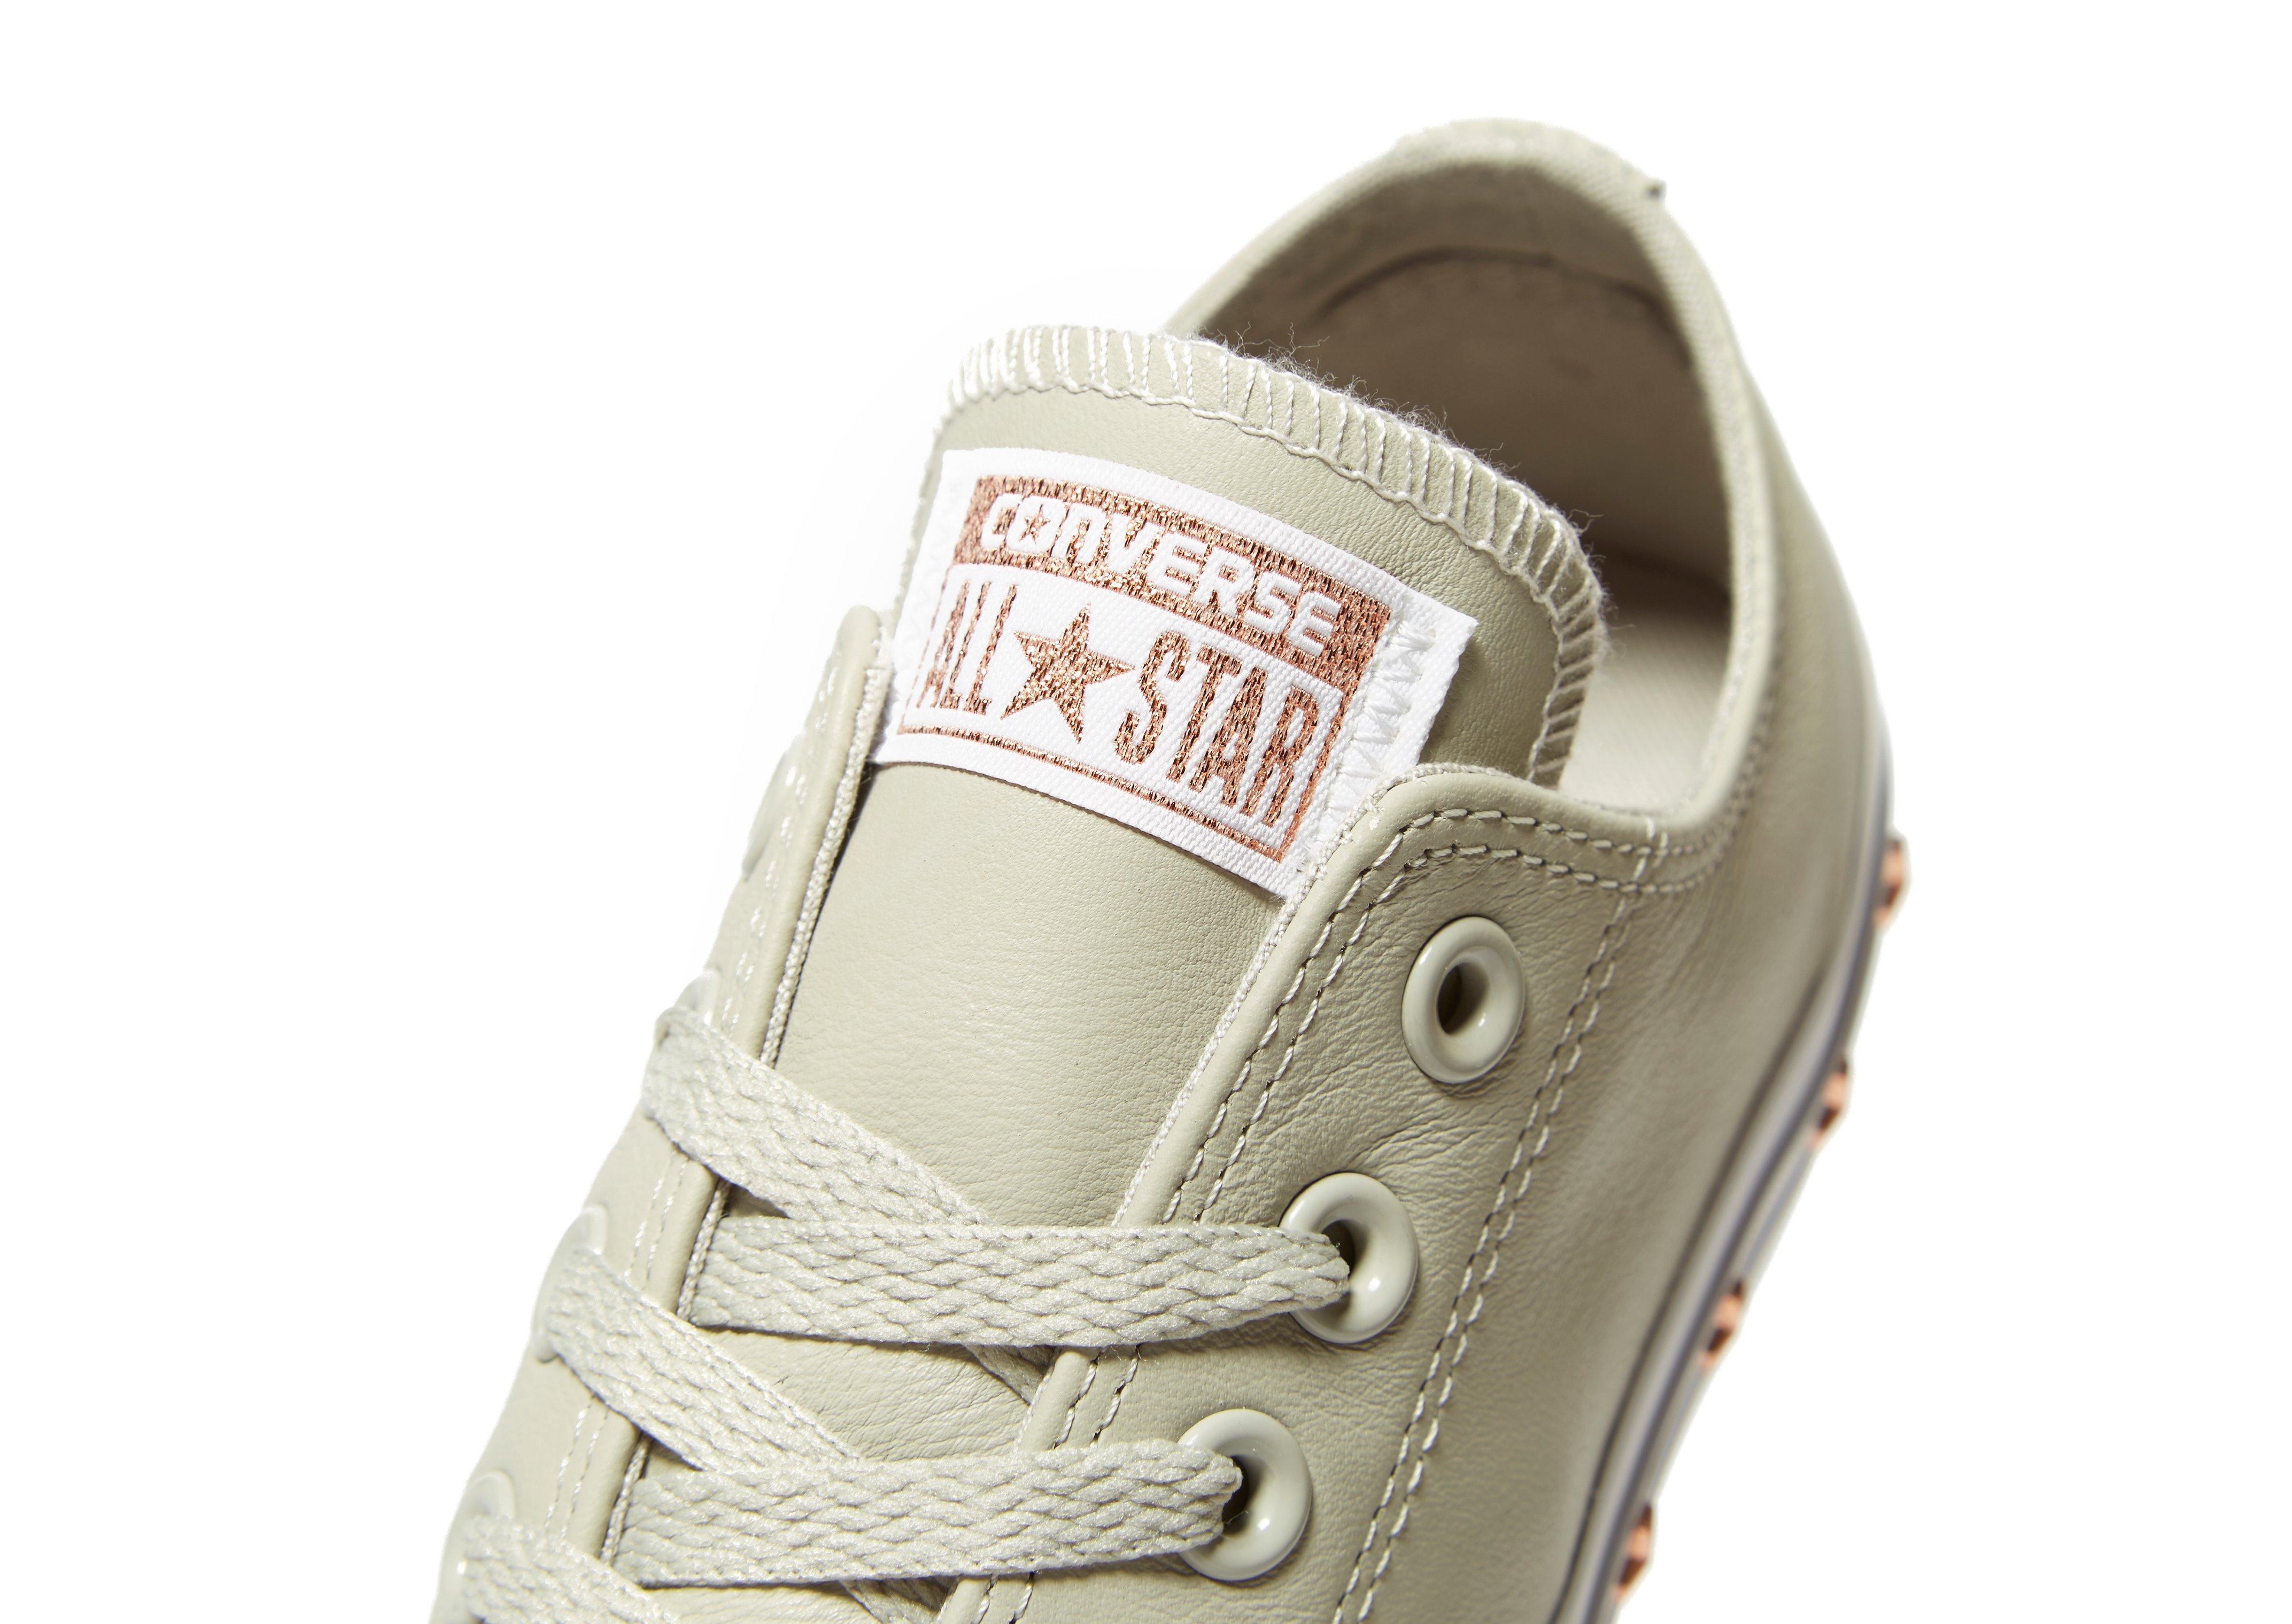 Converse All Star Ox Stud Flash Sales, 59% OFF | empow-her.com